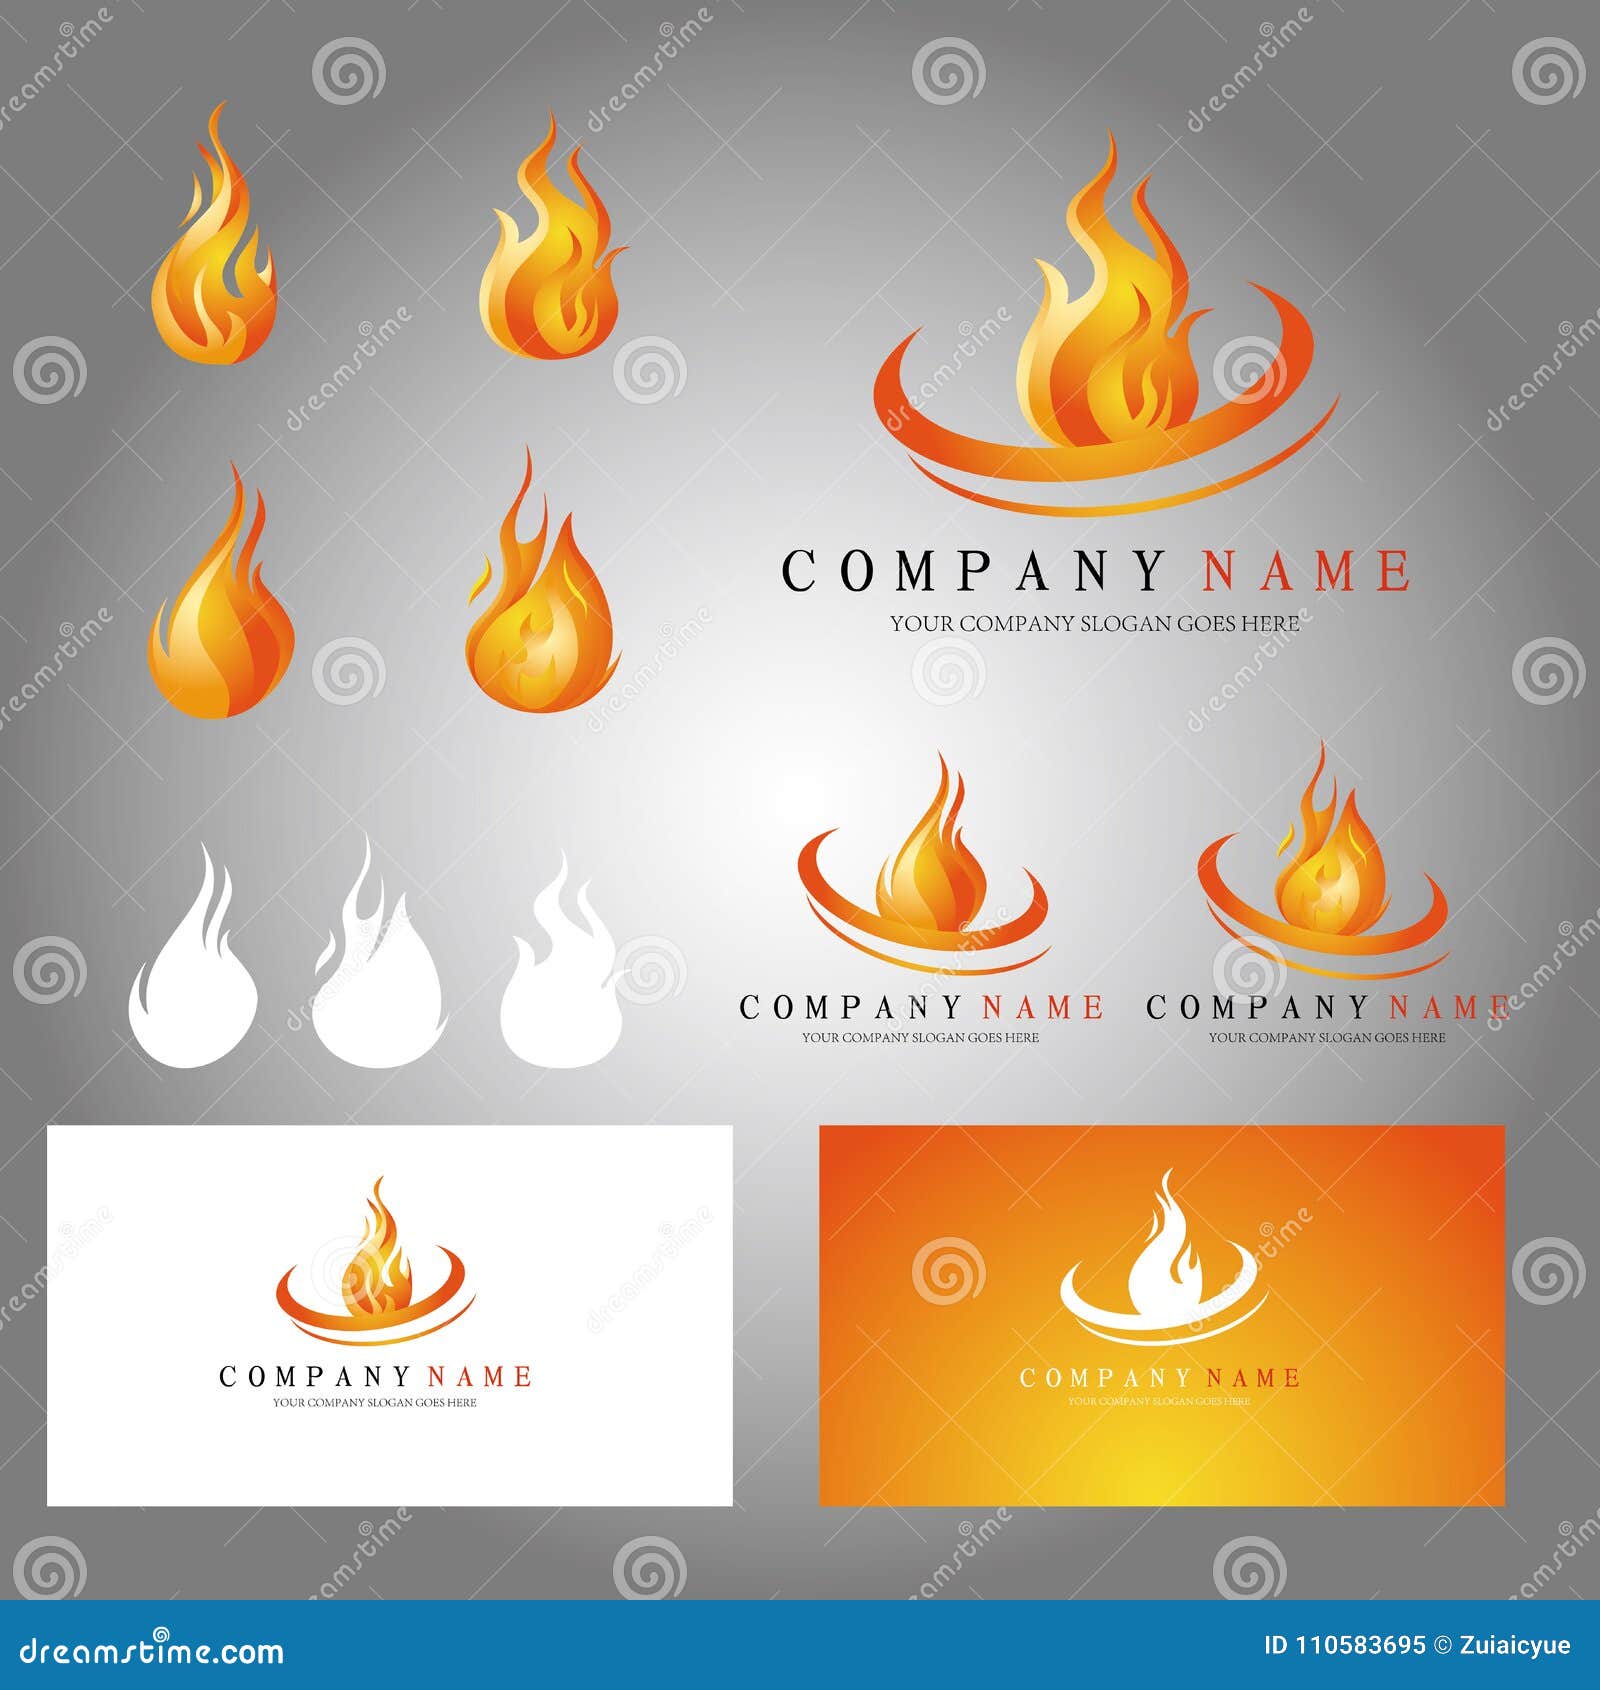 fire icons and bussiness cards